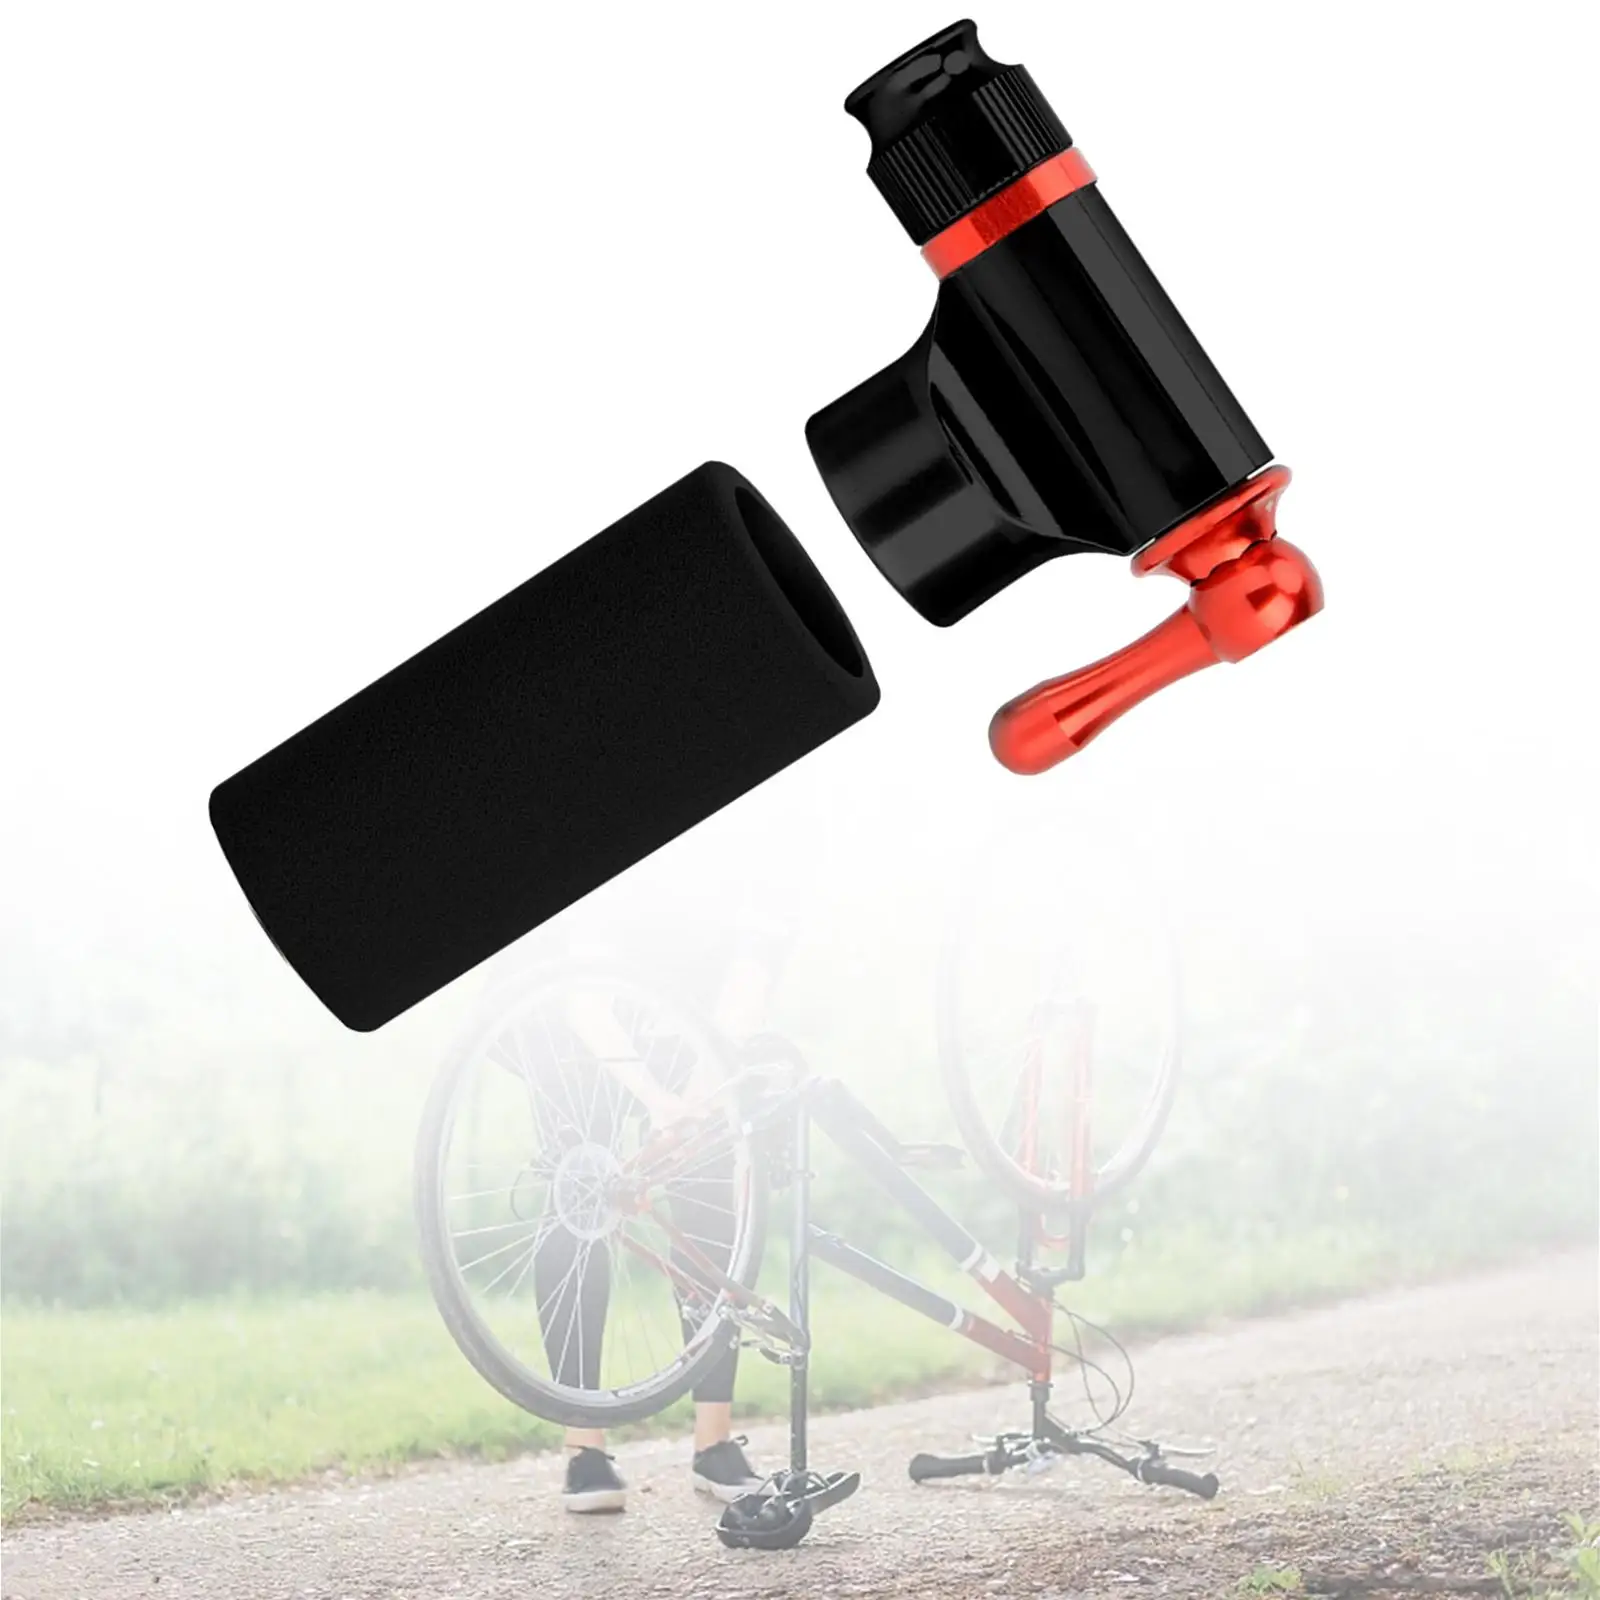 CO2 Bike Tire Inflator Portable Portable Inflator Connector for Ball Sports